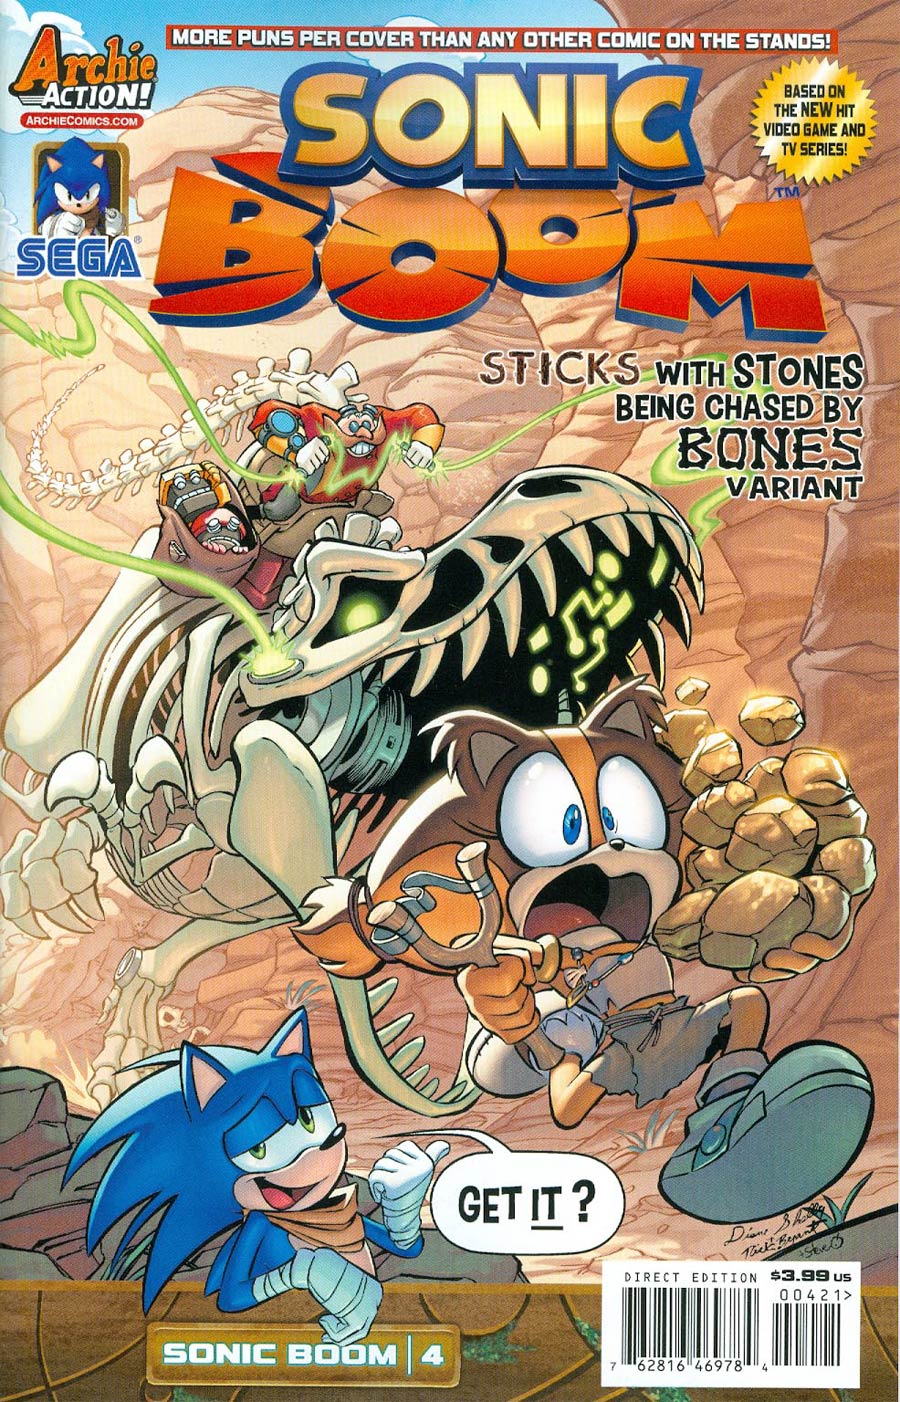 Sonic Boom #4 Cover B Variant Sticks With Stones Being Chased By Bones Cover